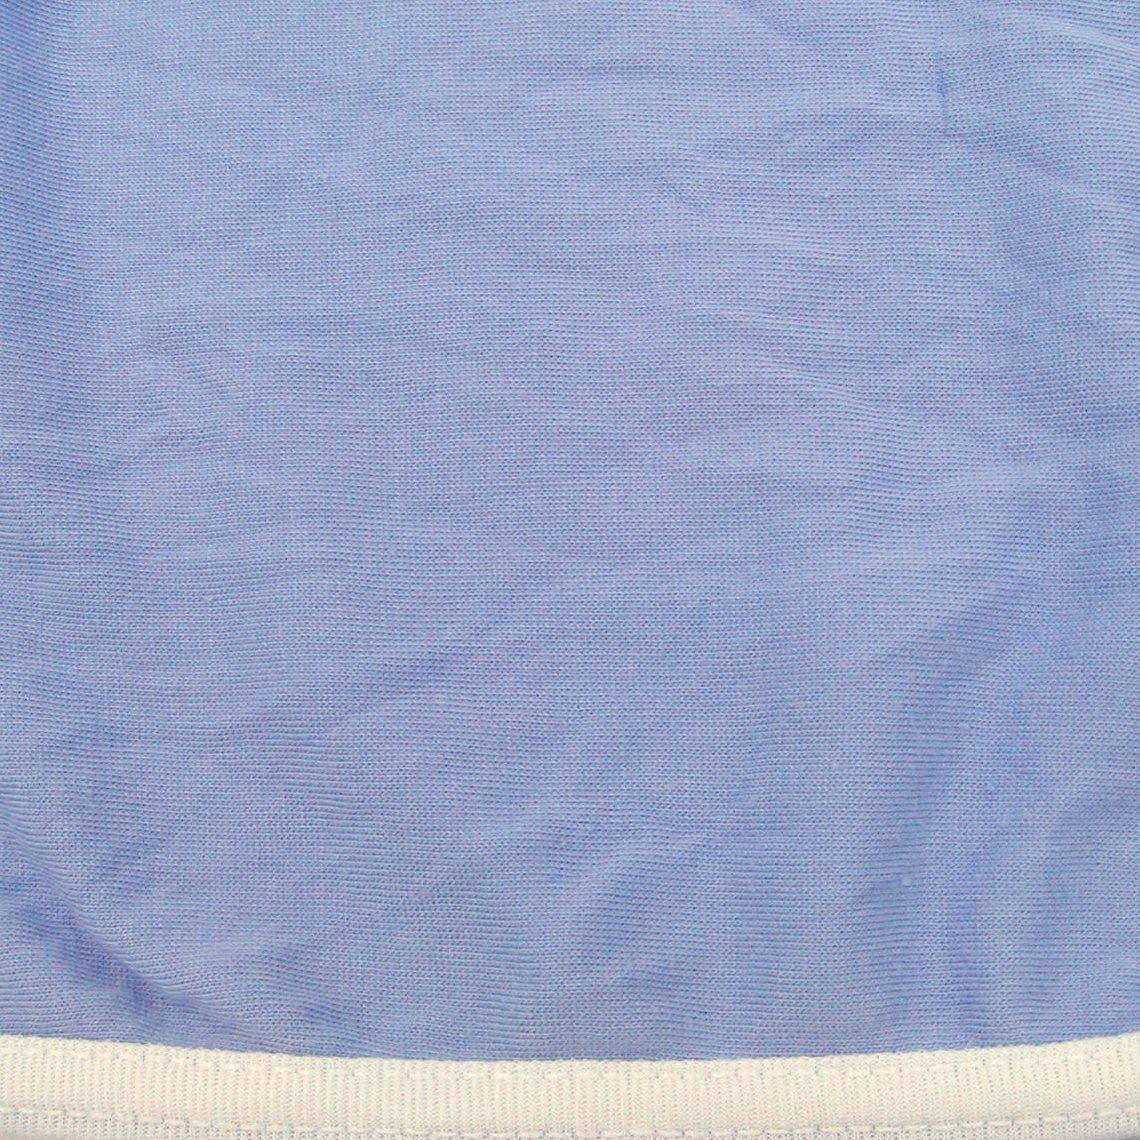 Blue Knit Sheeting - A&A Wiping Cloth